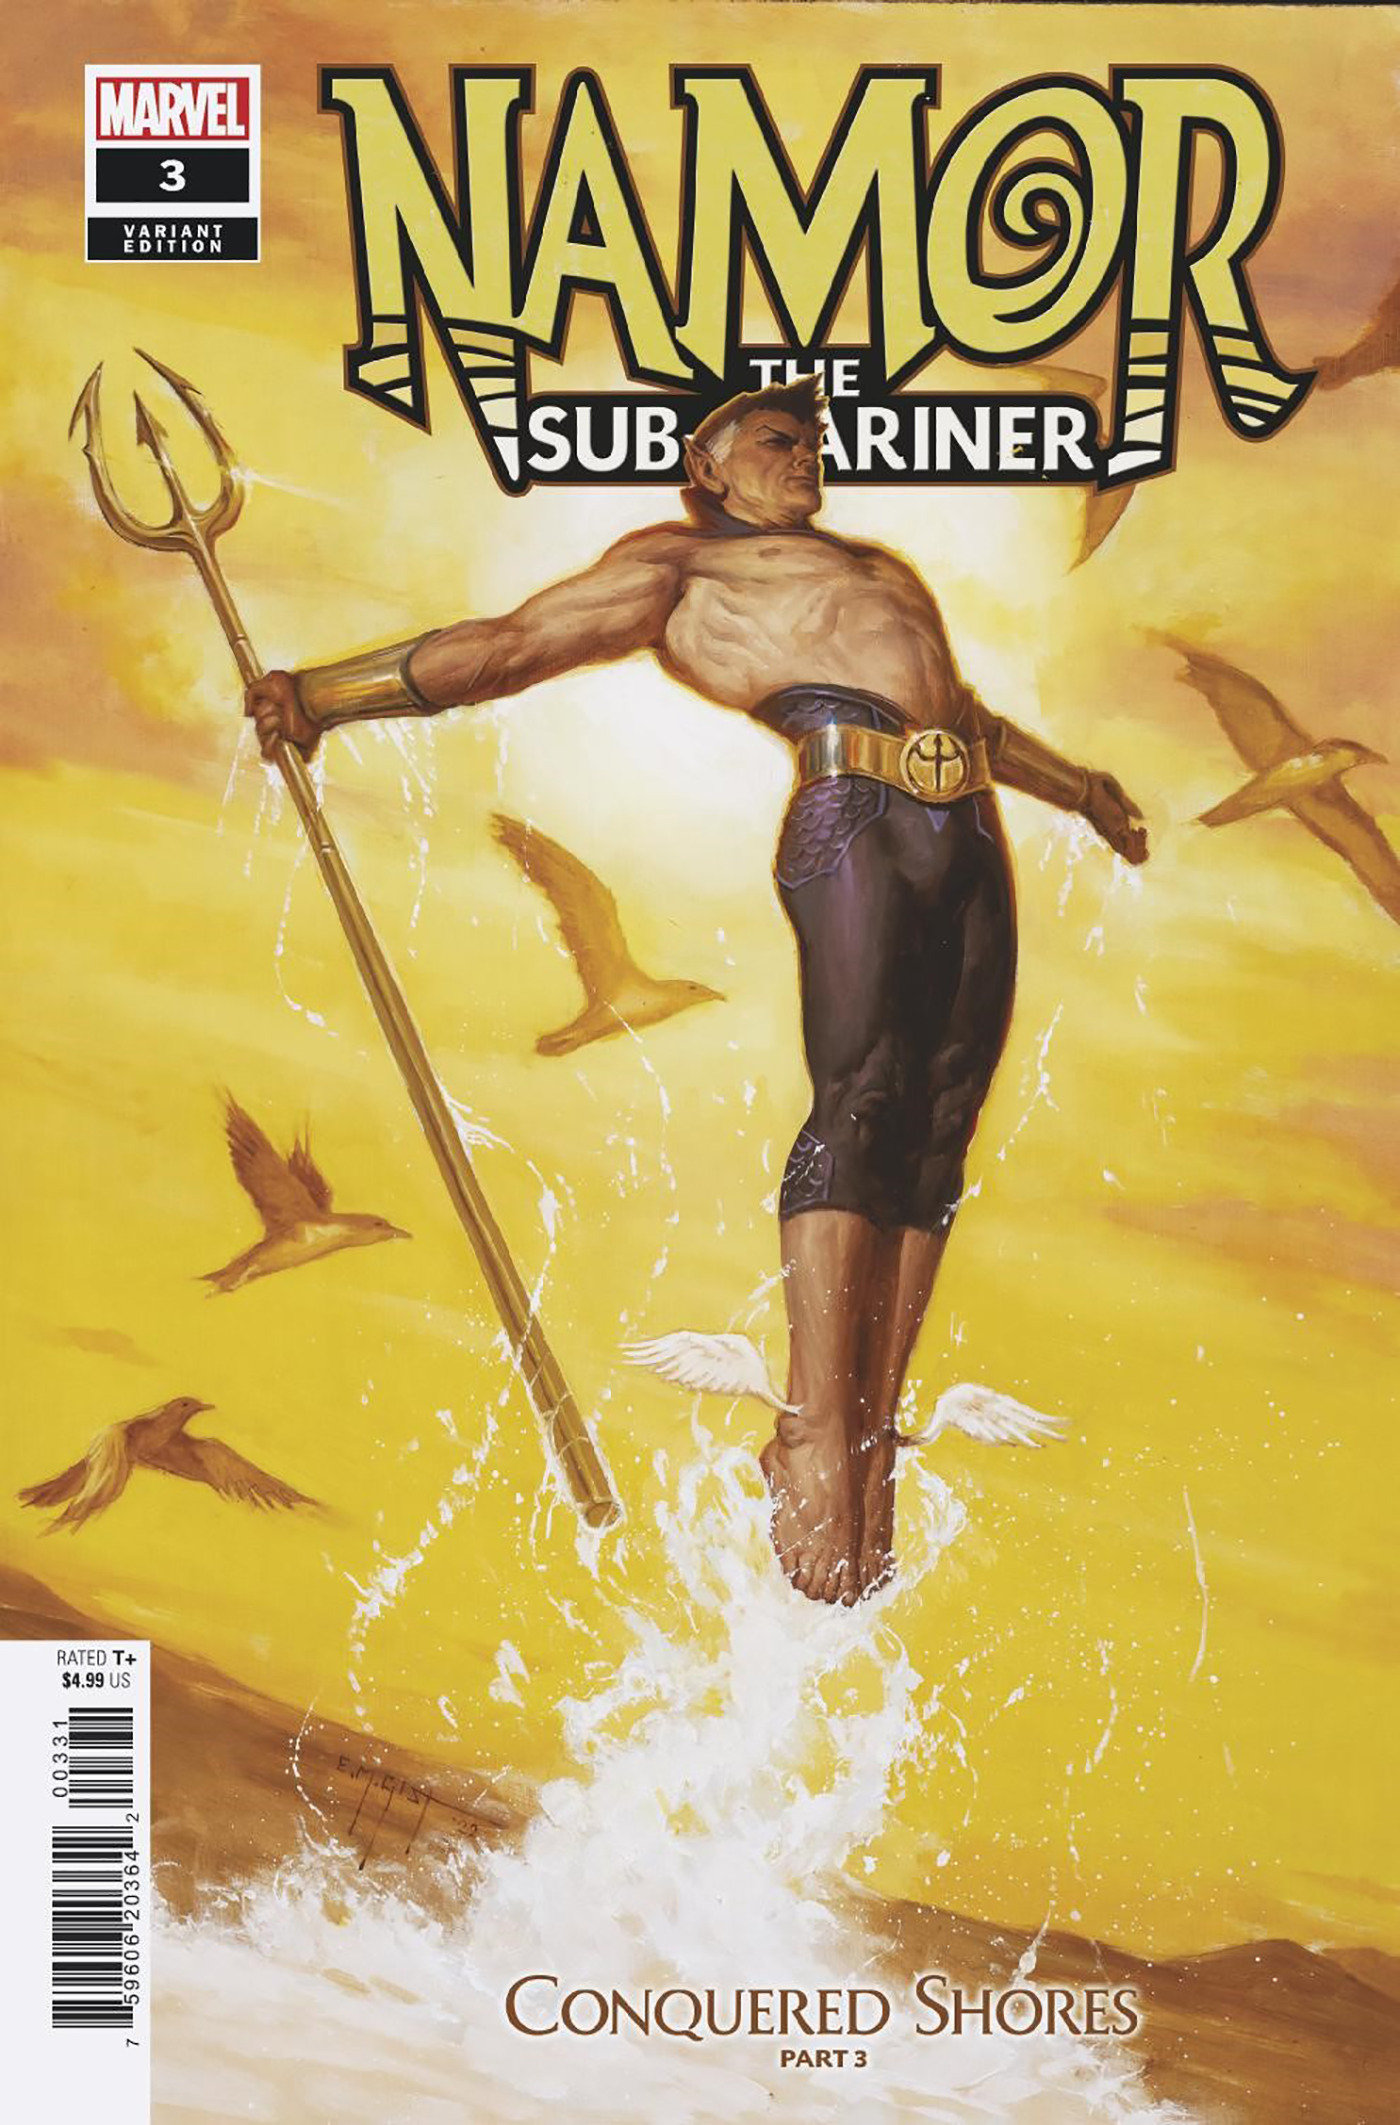 Namor Conquered Shores #3 1 for 25 Incentive Gist Variant (Of 5)